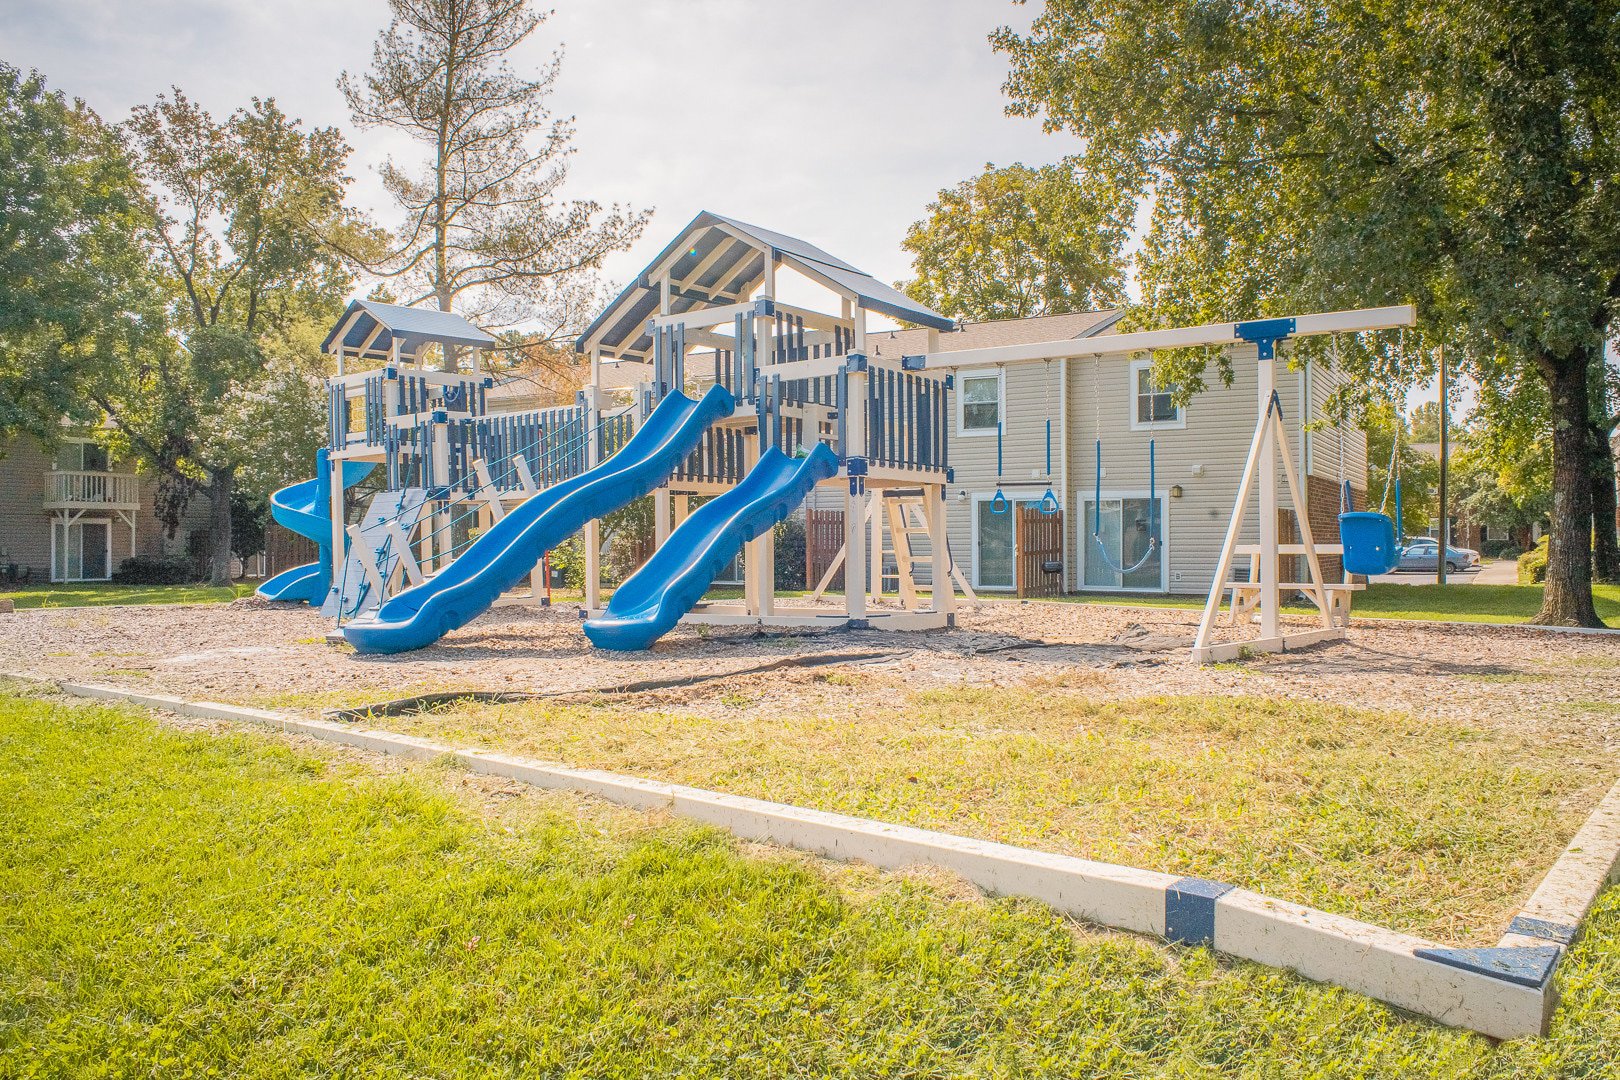 playground at Ashley Woods Apartments, located in the heart of Greensboro, North Carolina